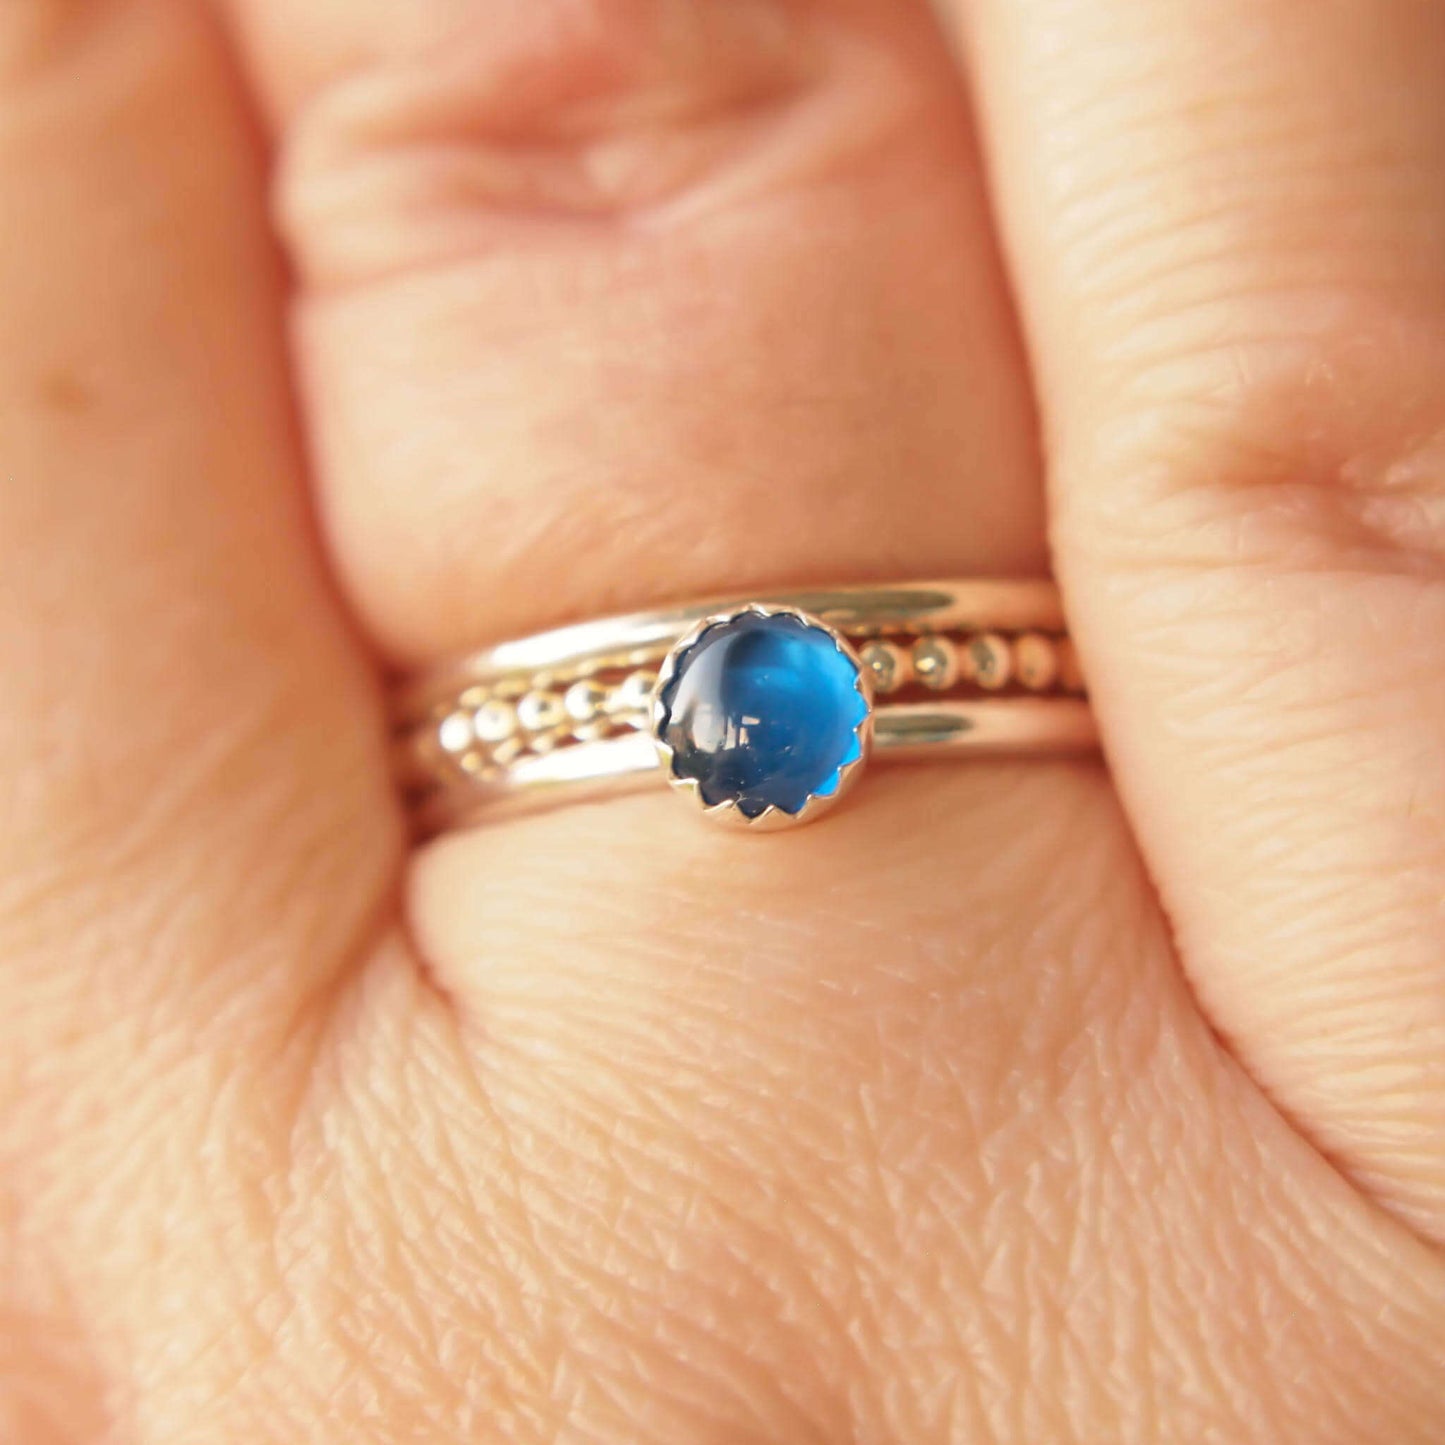 Simple styled silver and blue gemstone ring with a lab sapphire round stone on a silver band. It's shown worn on a hand with a bubble and plain silver band alongside it.The ring is made from a 5mm round cabochon in bright blue. Handmade to your choice of ring size by maram jewellery in Scotland